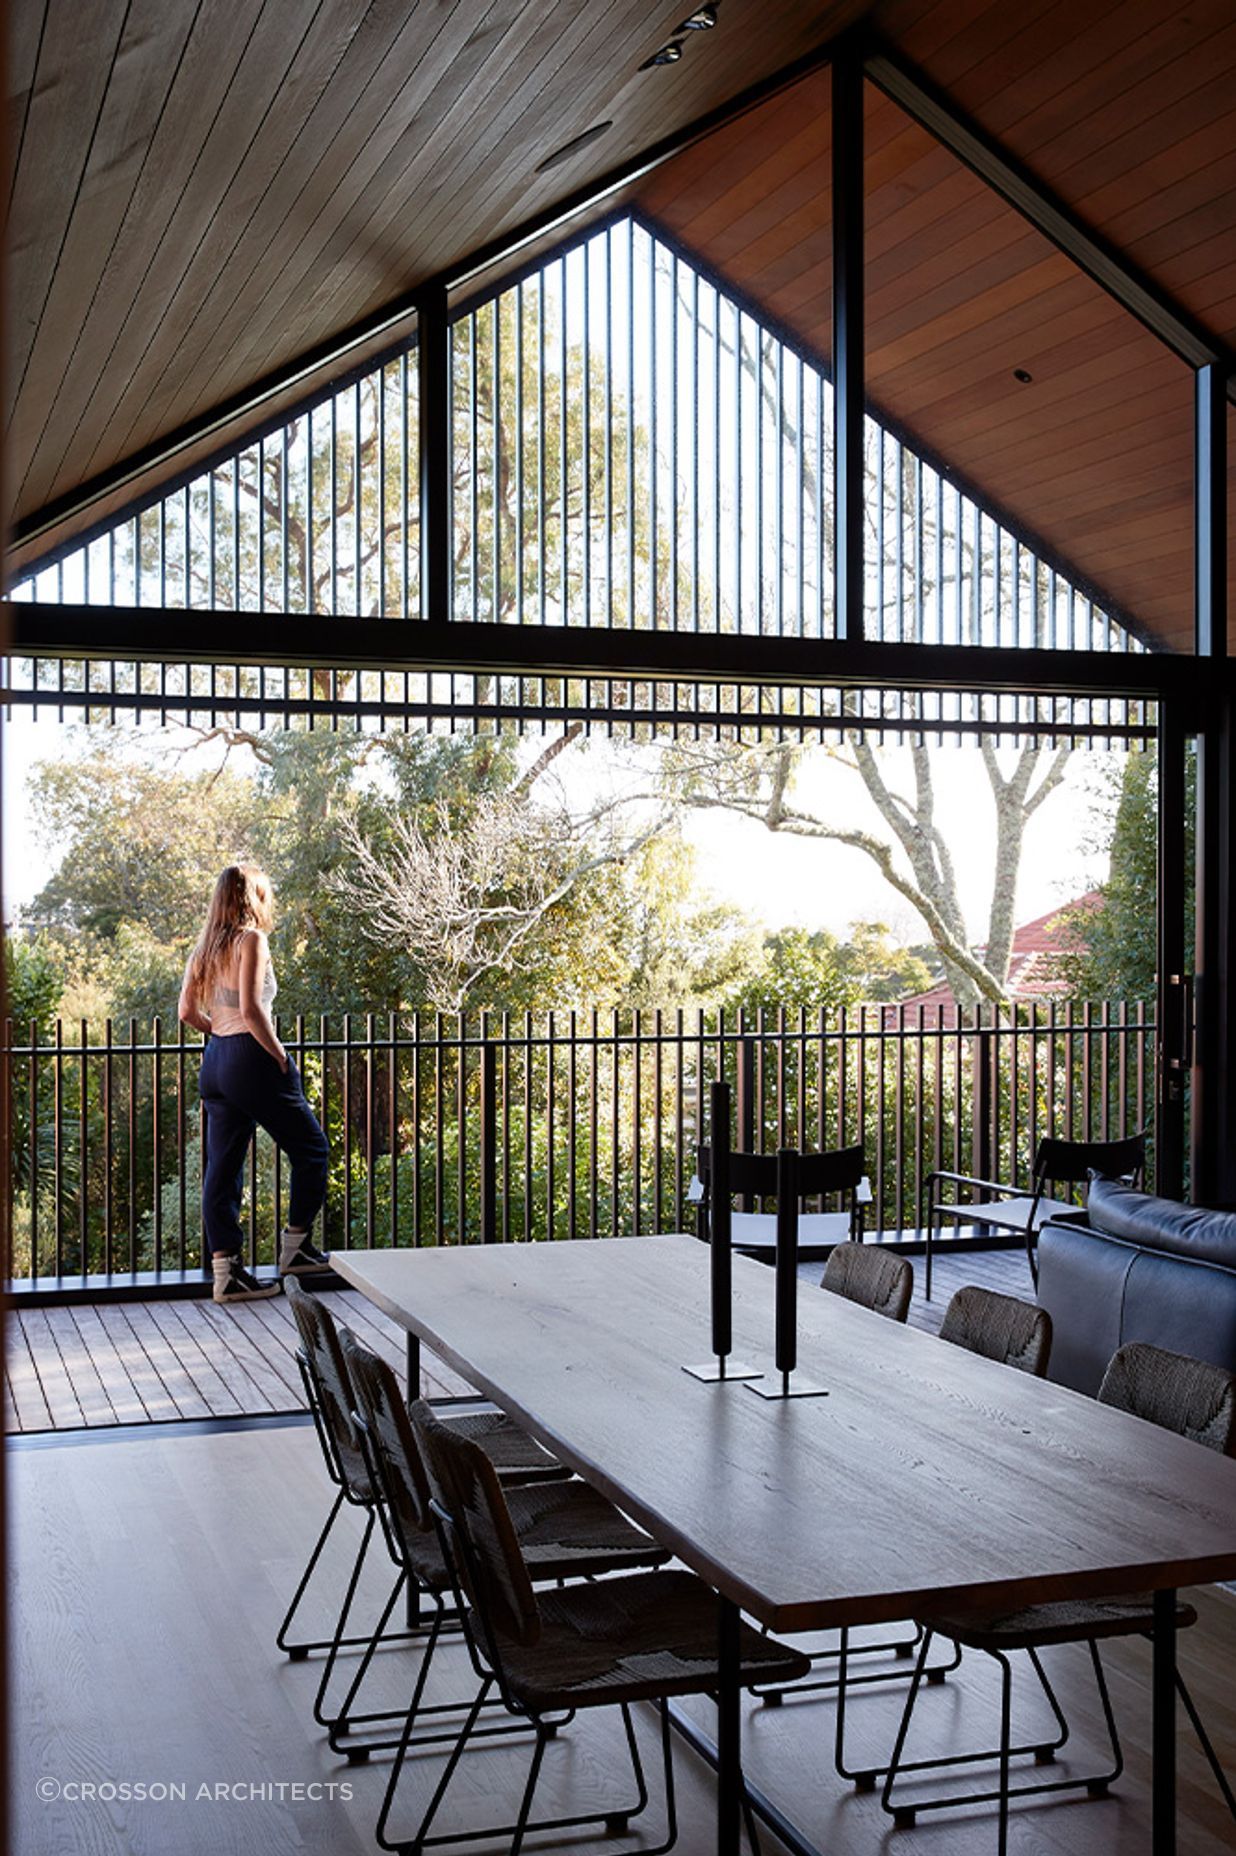 'Resonant House' sits in Central Parnell, harking a dramatic gable apex.